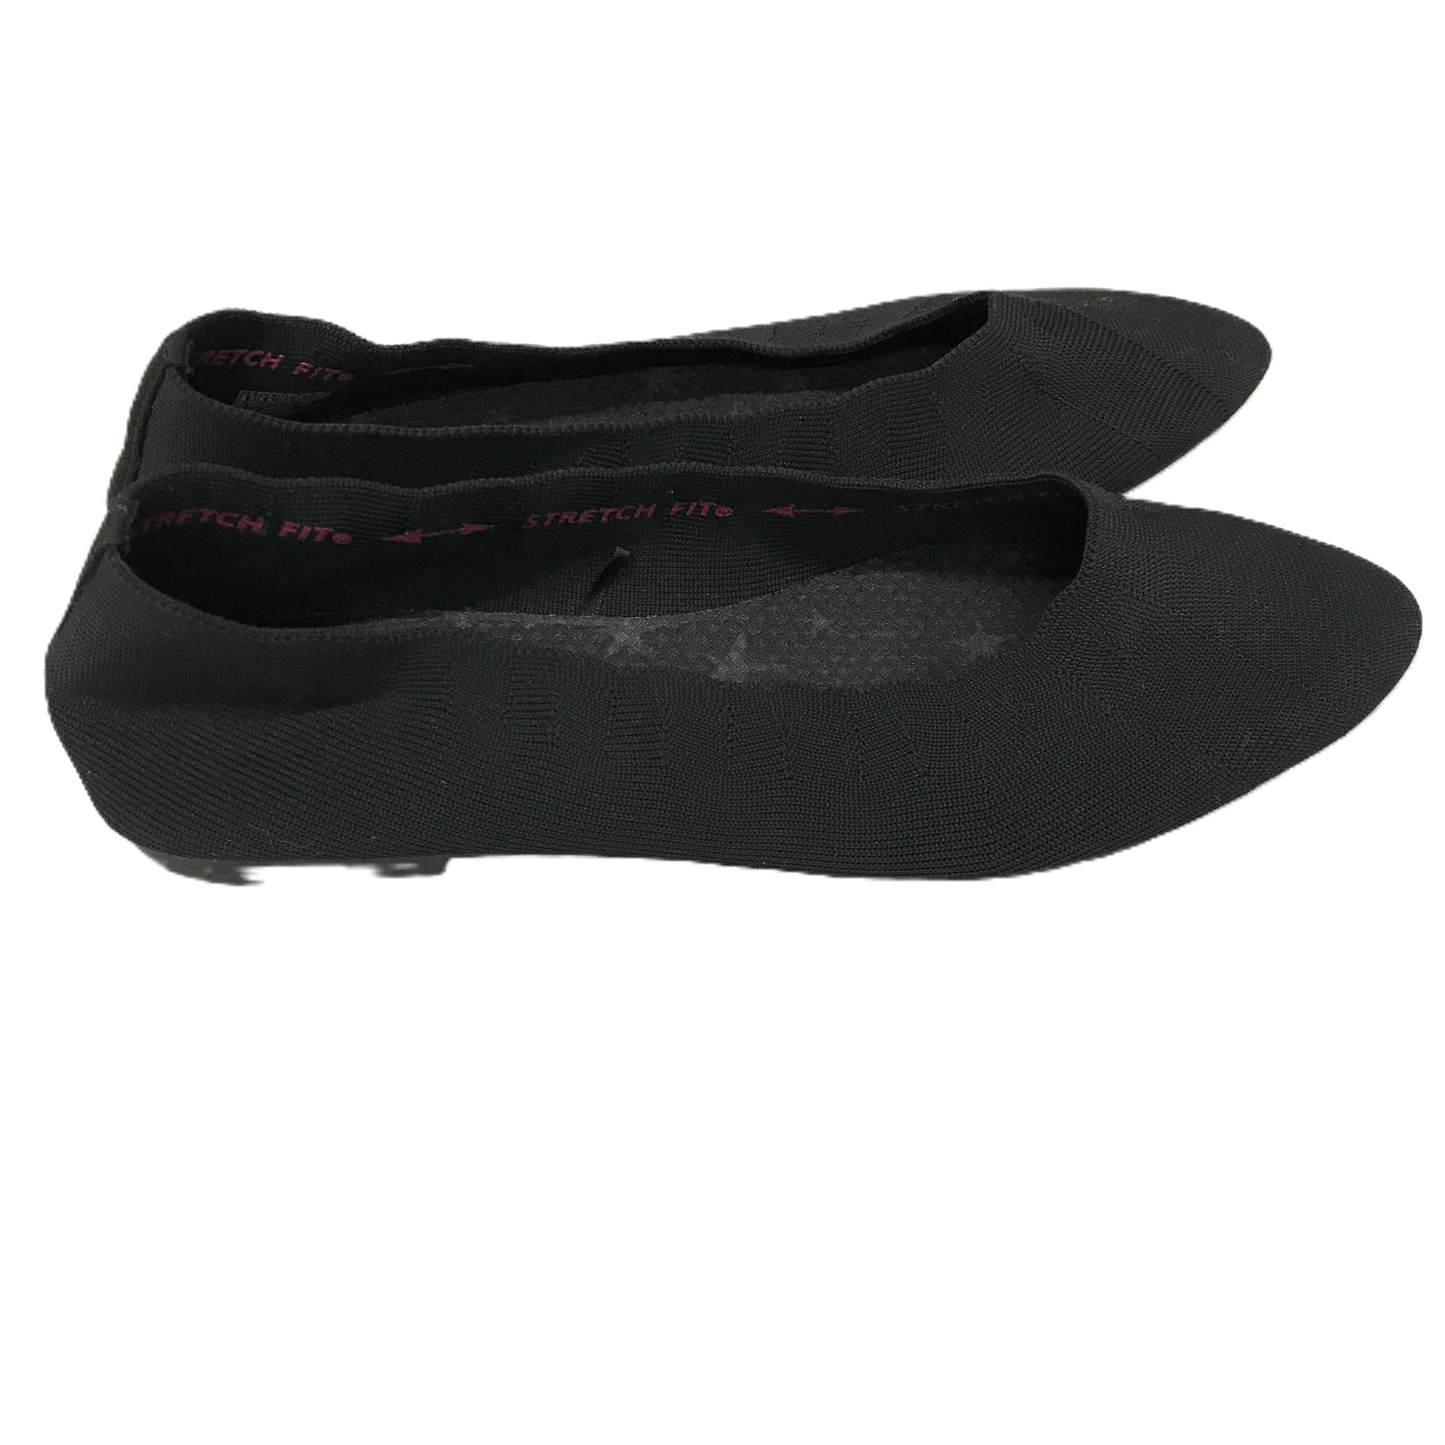 Black Shoes Flats By Skechers, Size: 8.5